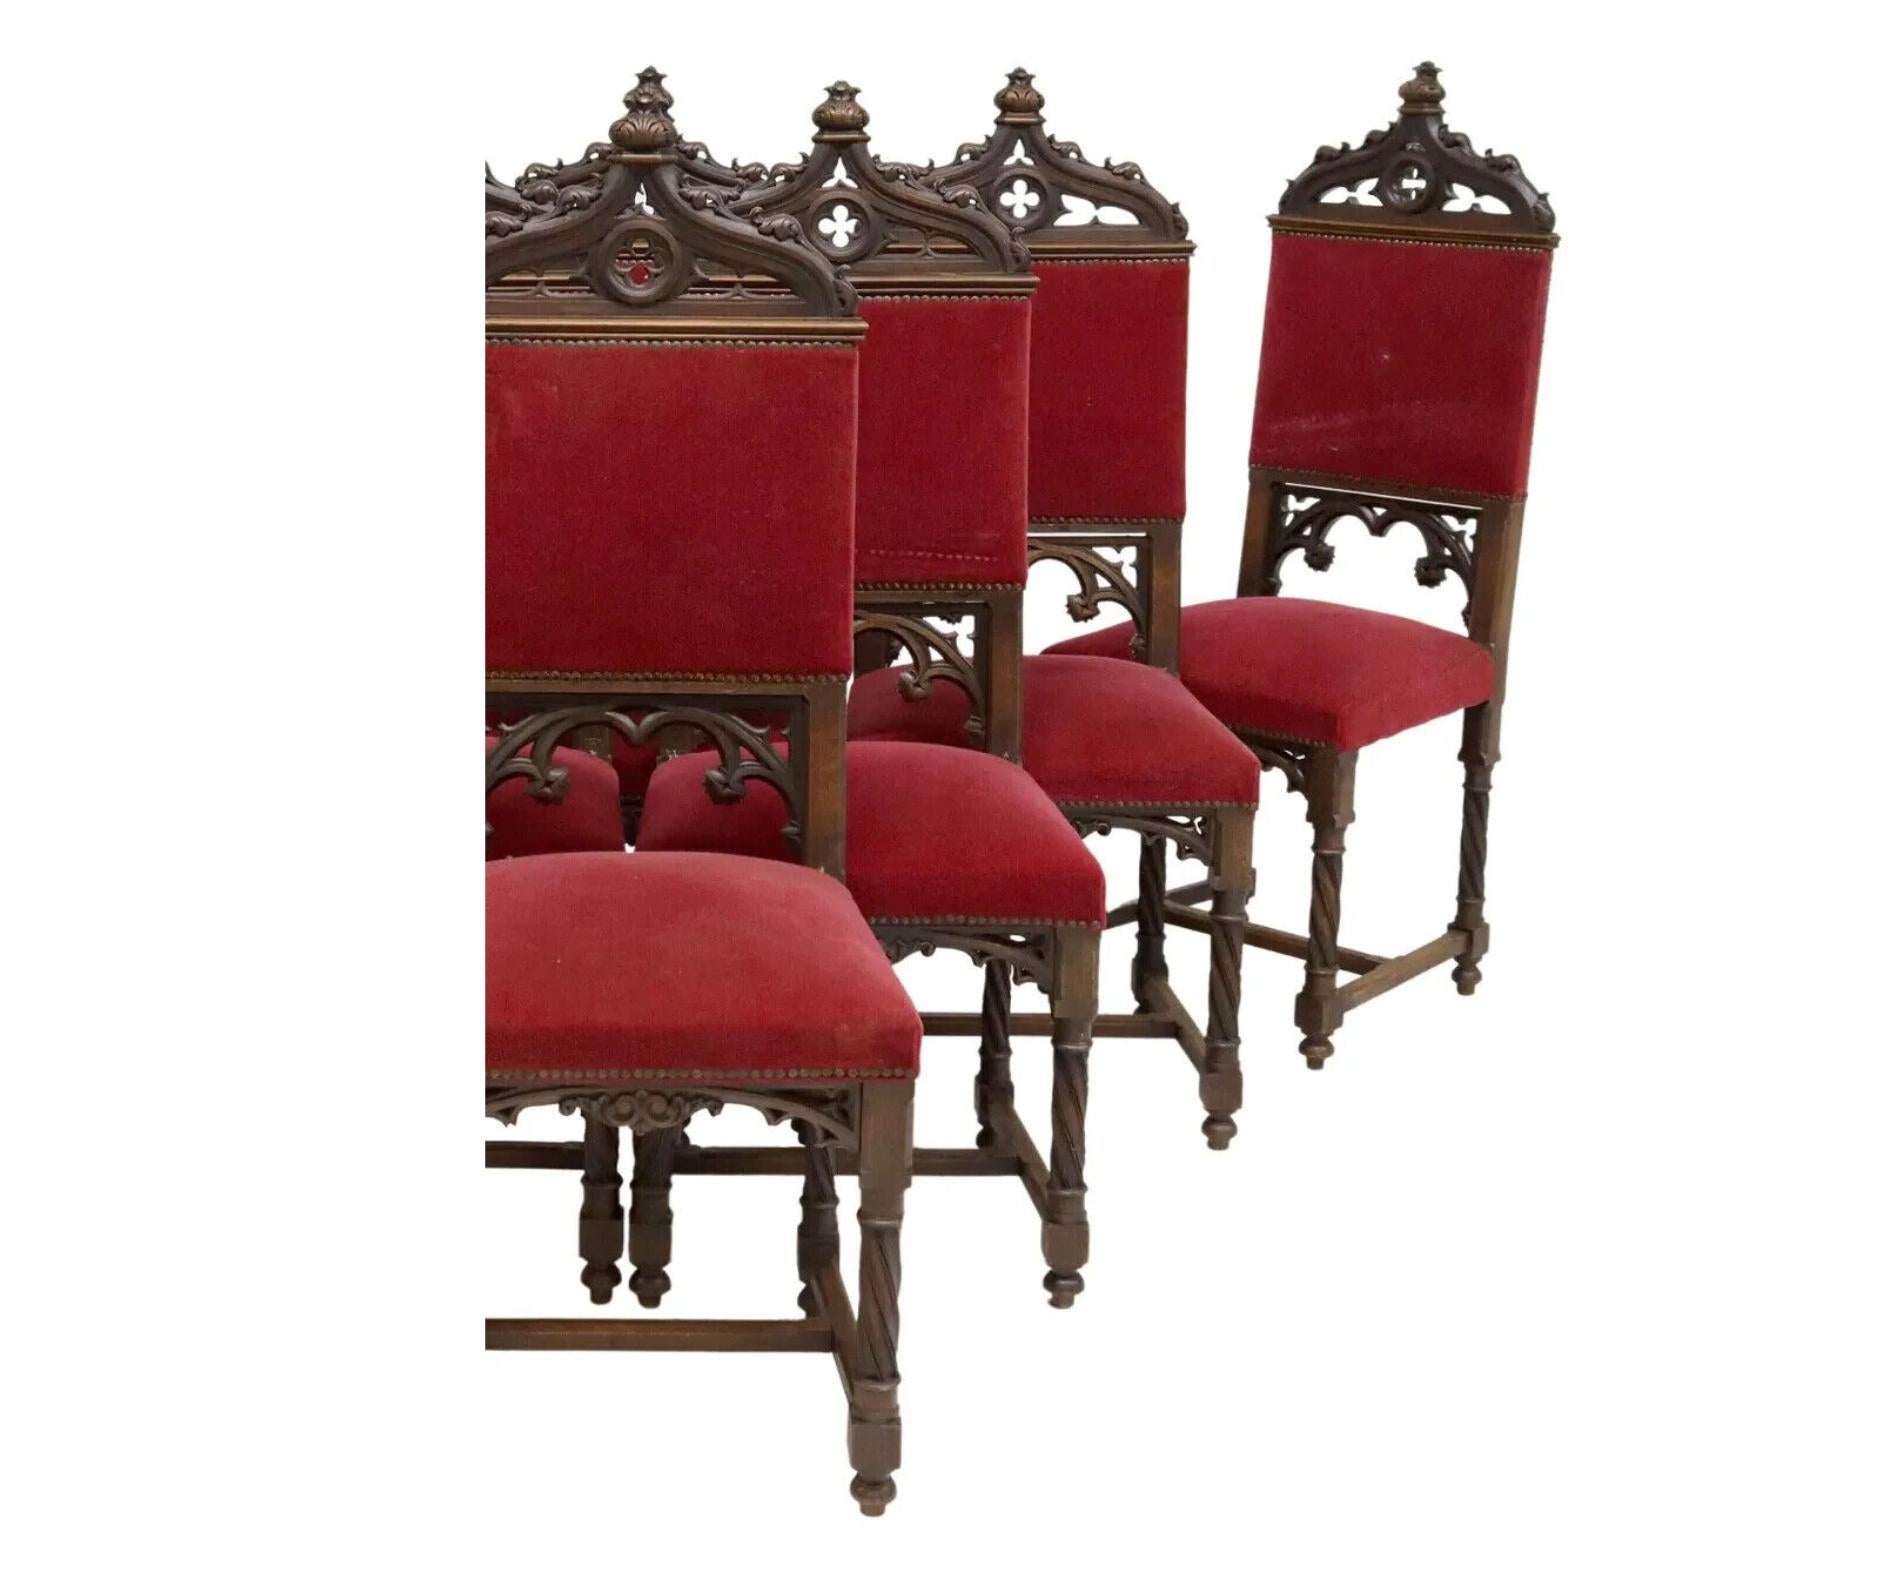 Other Early 1900's Antique (8) French Gothic Revival, Carved, Red Side Chairs